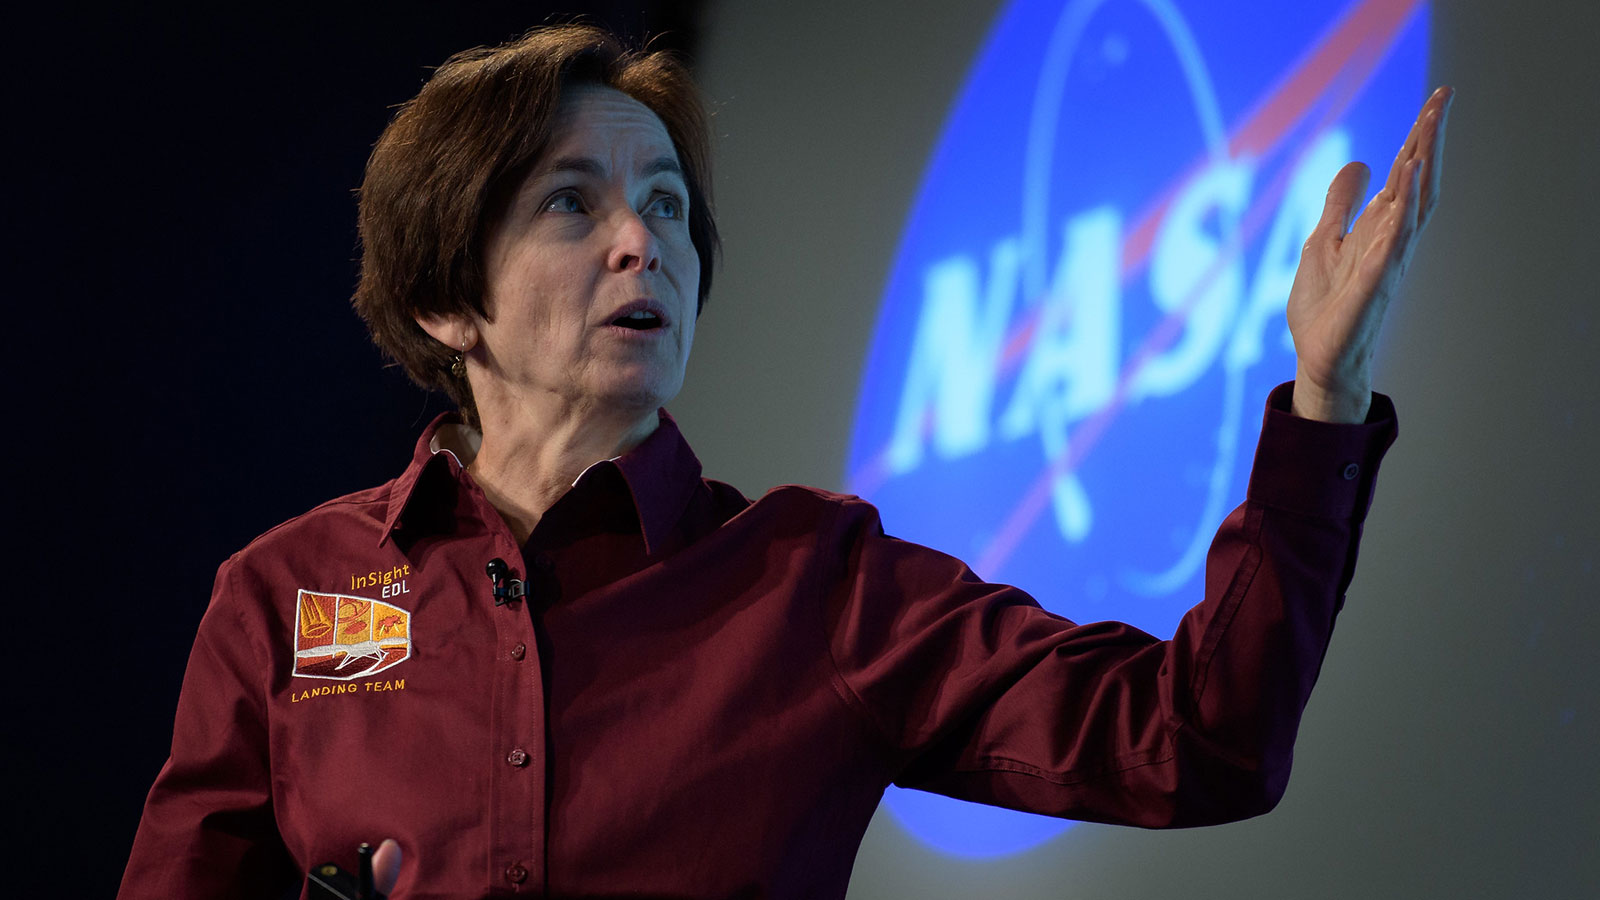 Sue Smrekar, seen here at the 2018 media briefing before the landing of NASA's Mars InSight